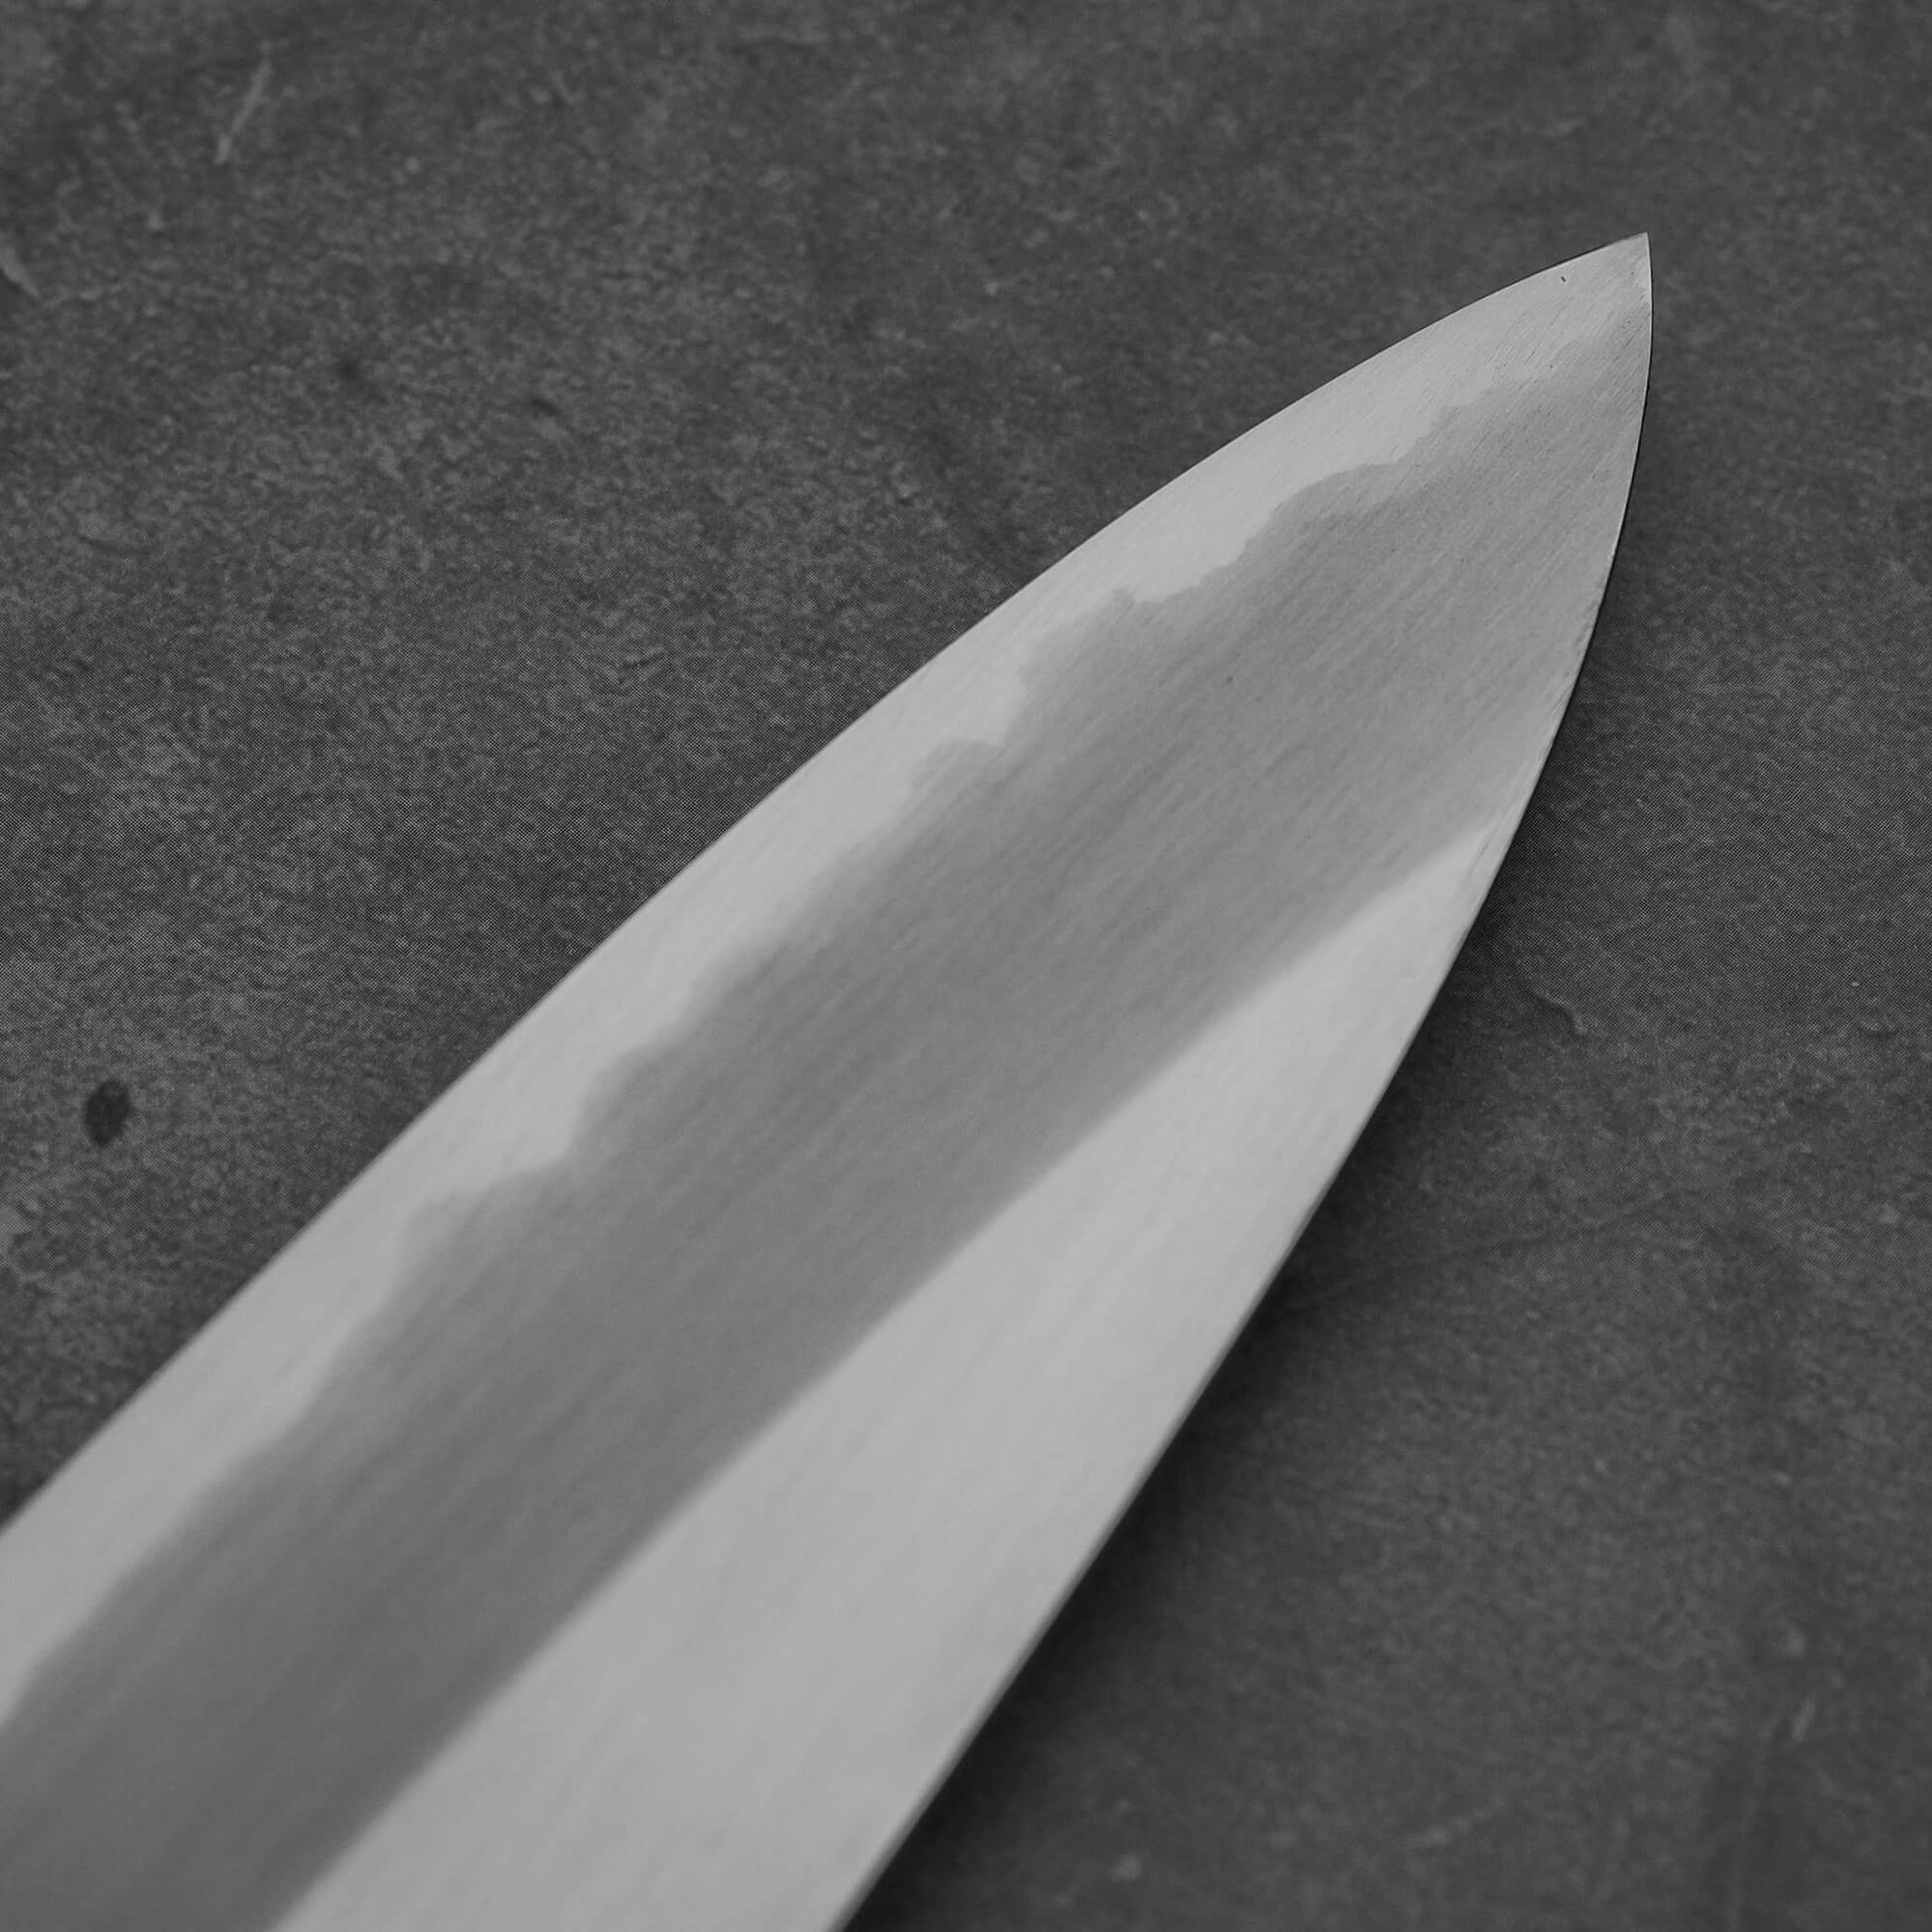 Close up view of the tip area of Nakagawa shinogi aogami#2 gyuto knife. Image shows the left side of the knife